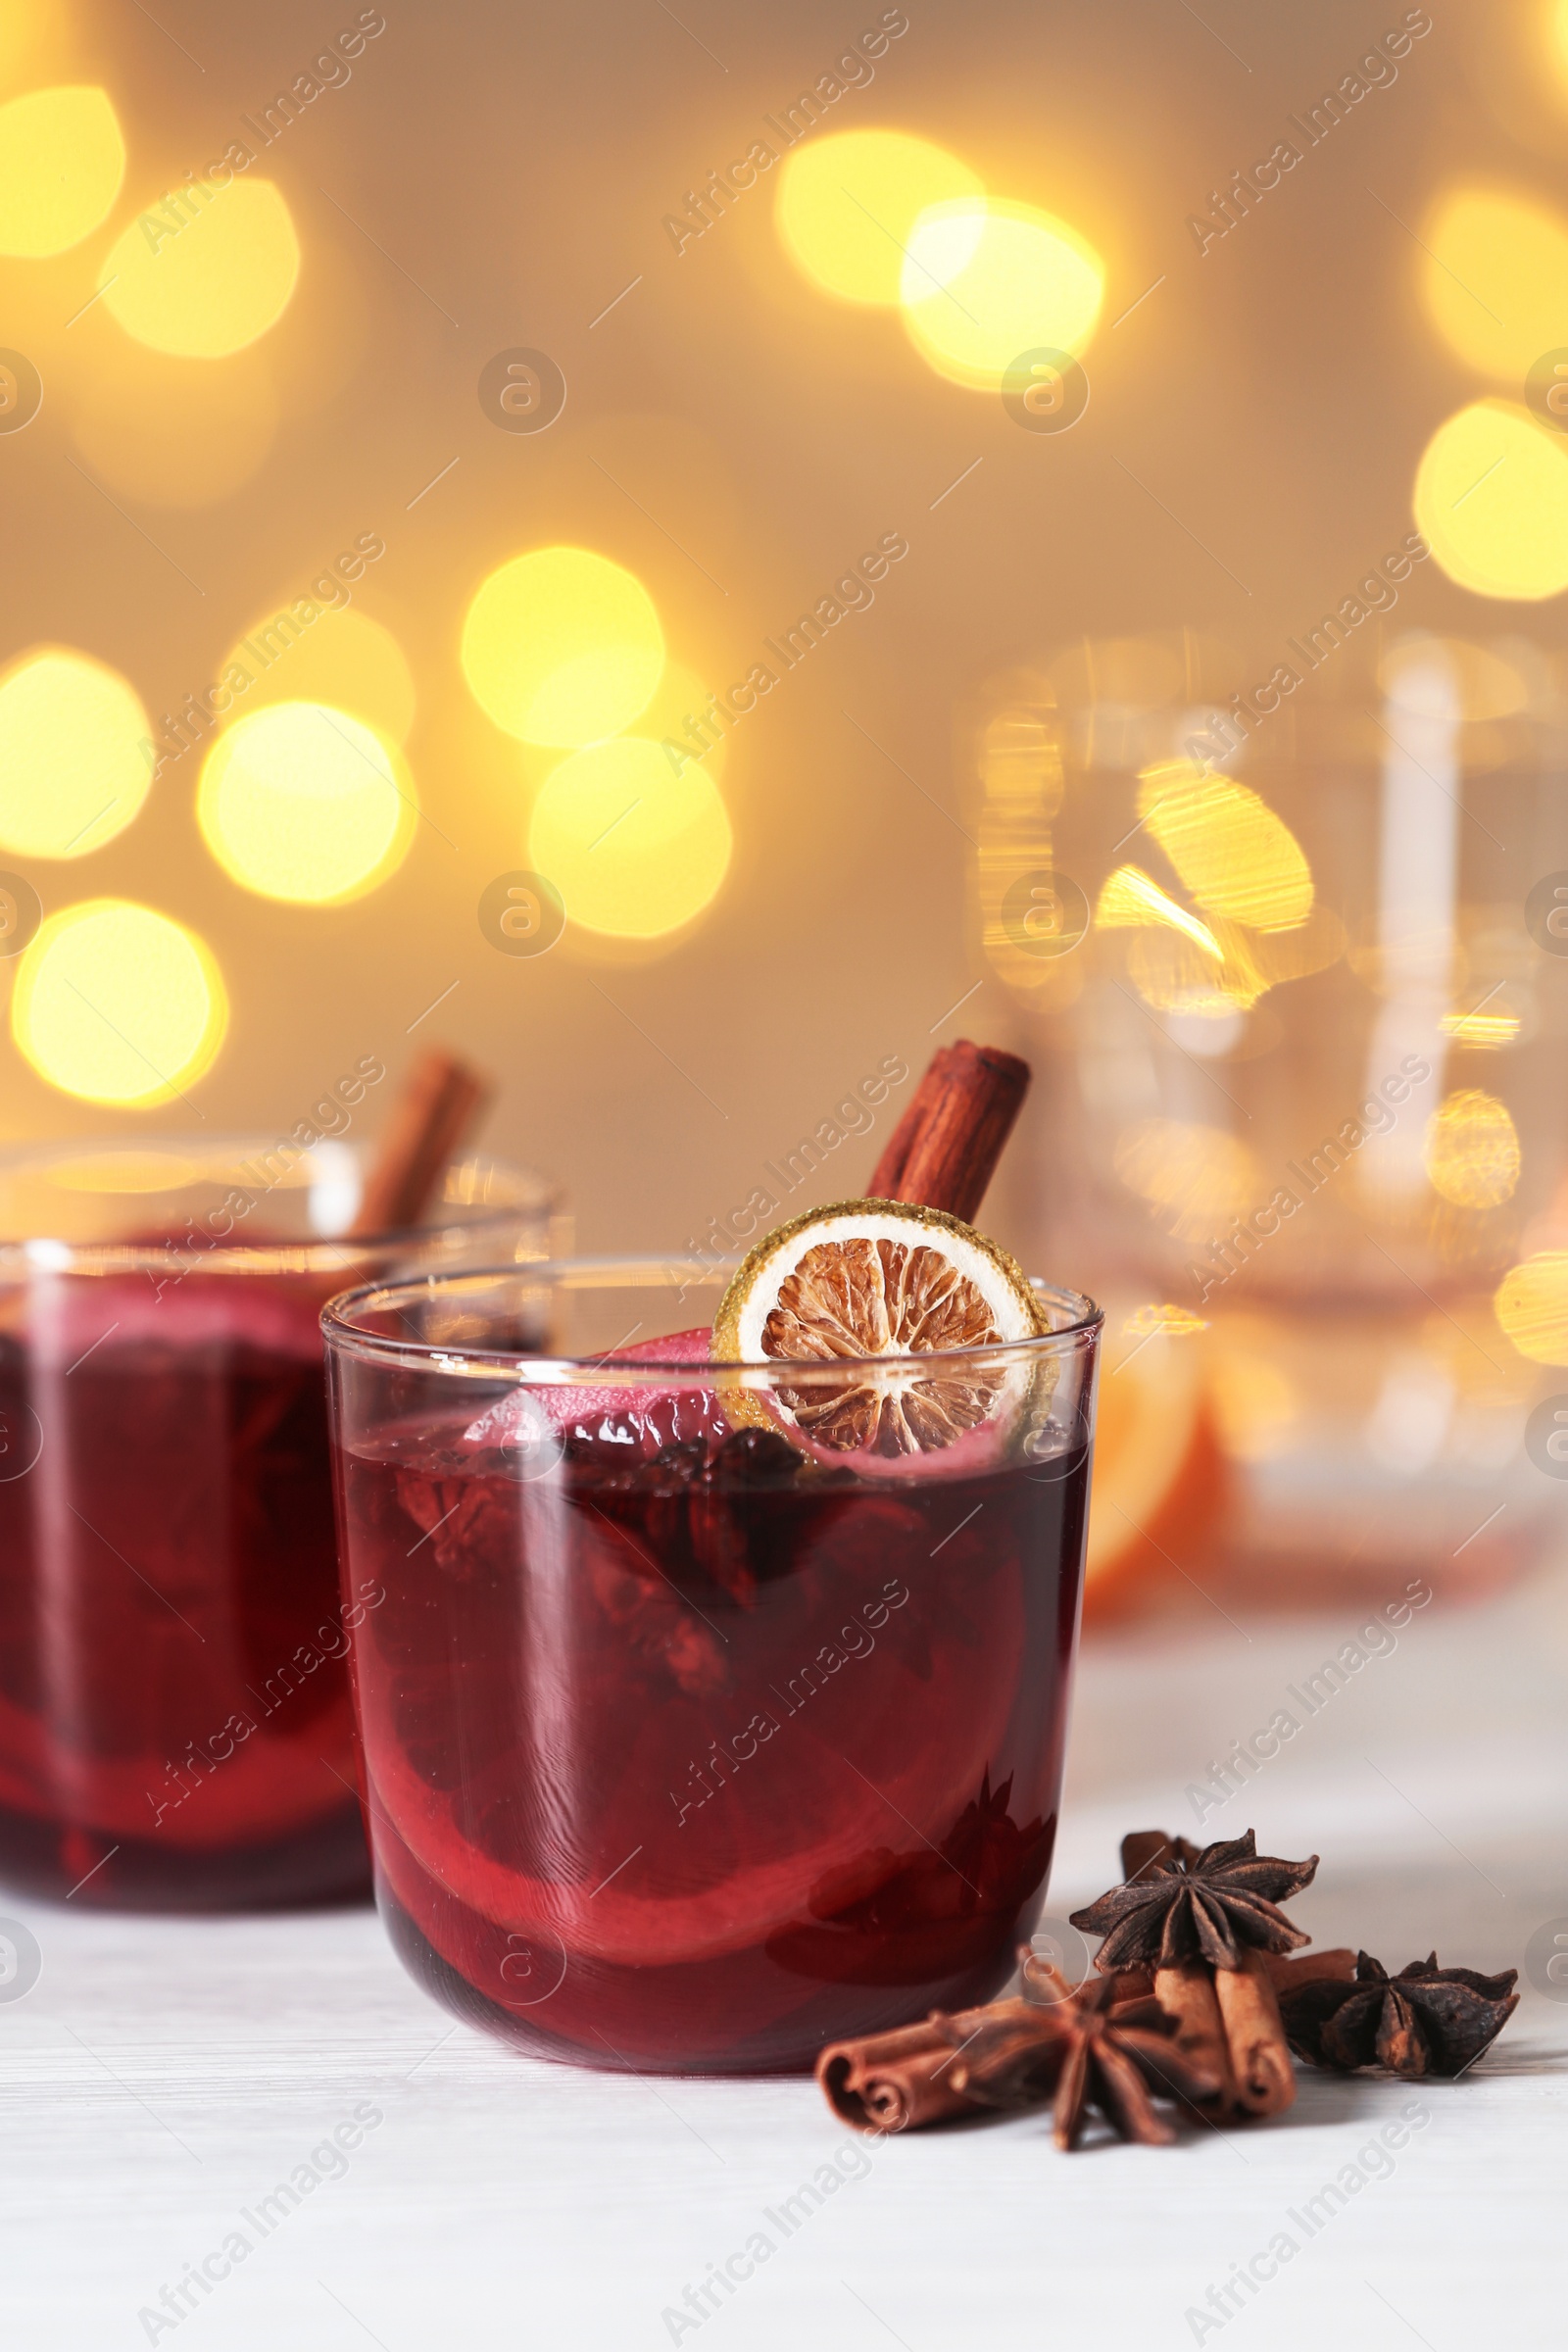 Photo of Glasses with mulled wine on table against blurred background